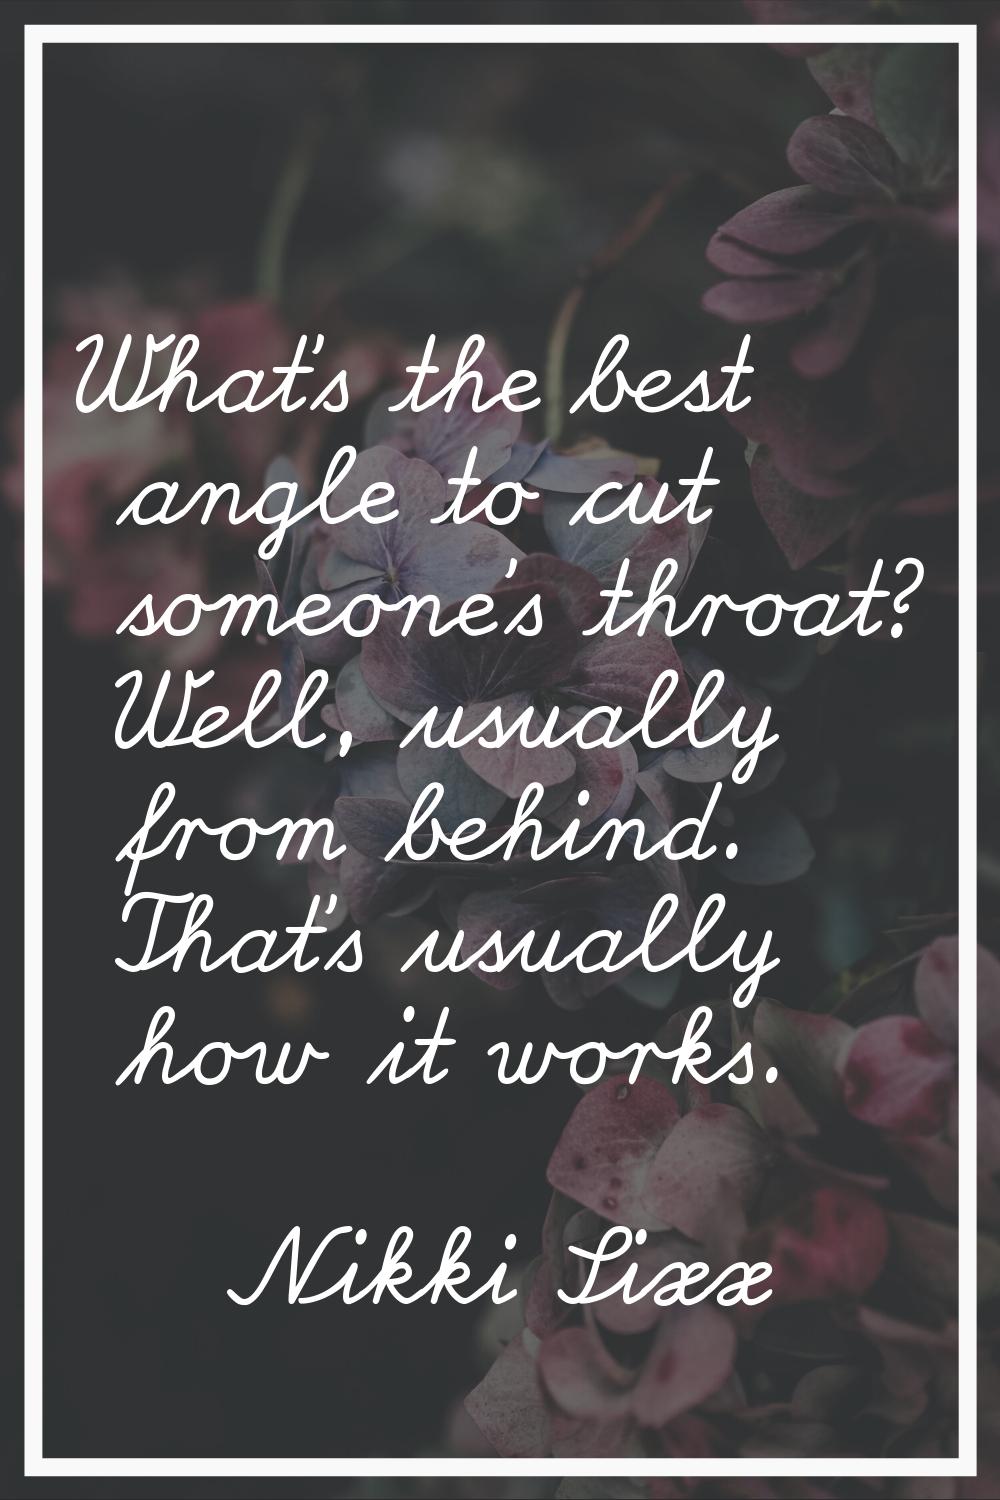 What's the best angle to cut someone's throat? Well, usually from behind. That's usually how it wor